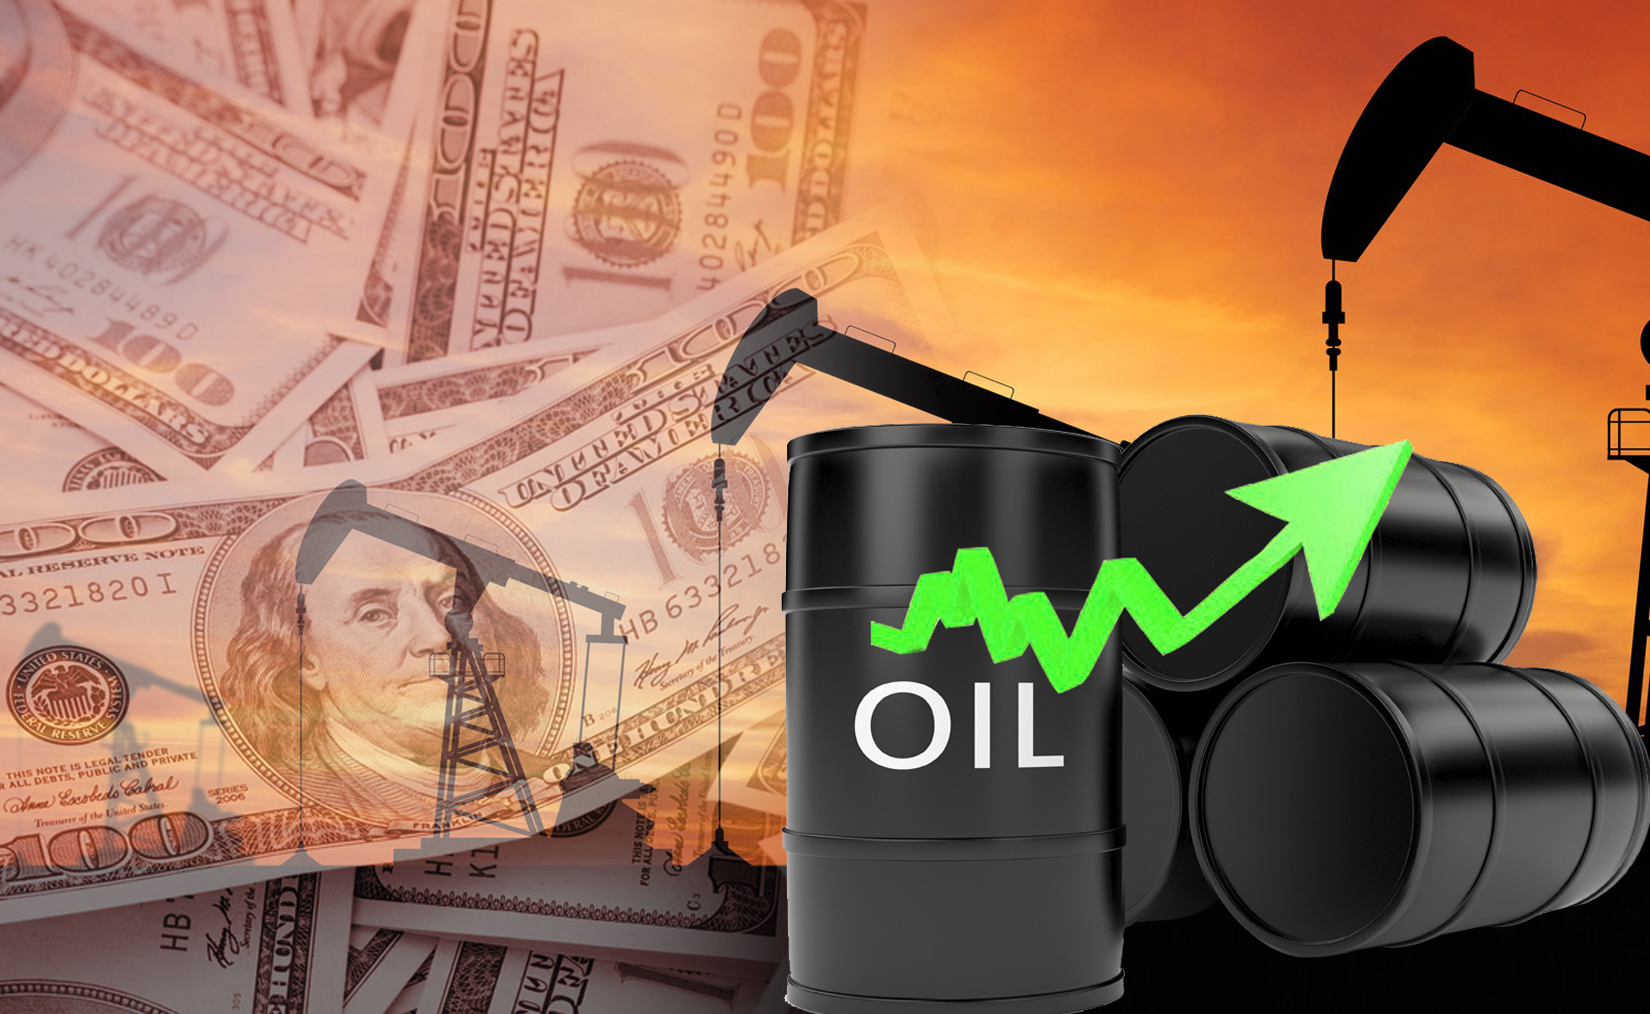 Kuwaiti oil price up USD 1.78 to stand at USD 59.48 per barrel                                                                                                                                                                                            